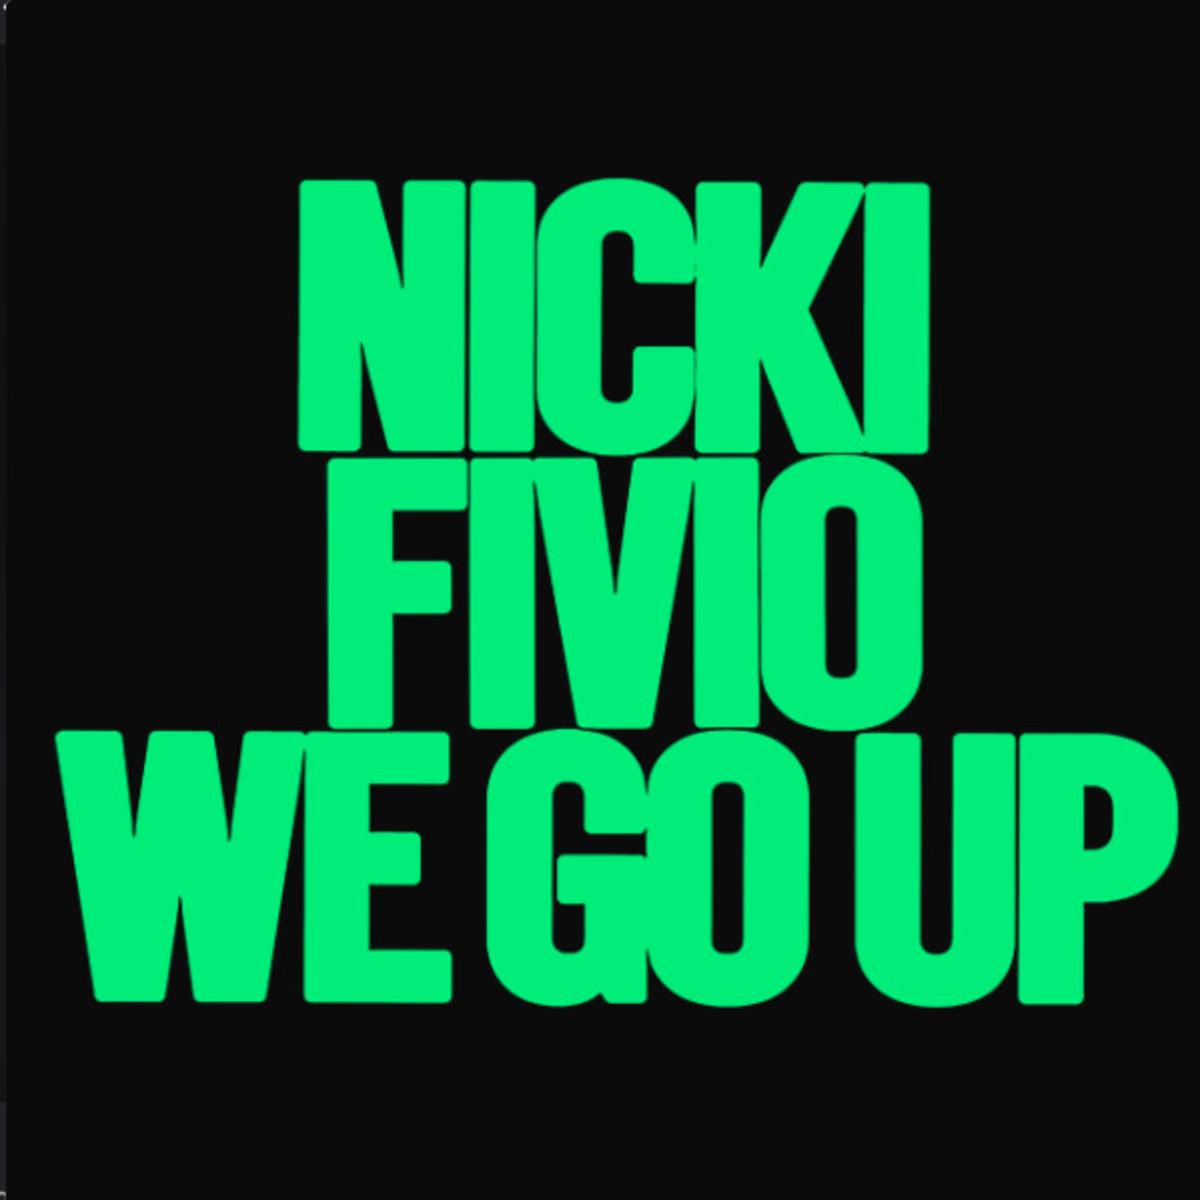 Nicki Minaj & Fivio Foreign Join Forces For “We Go Up”